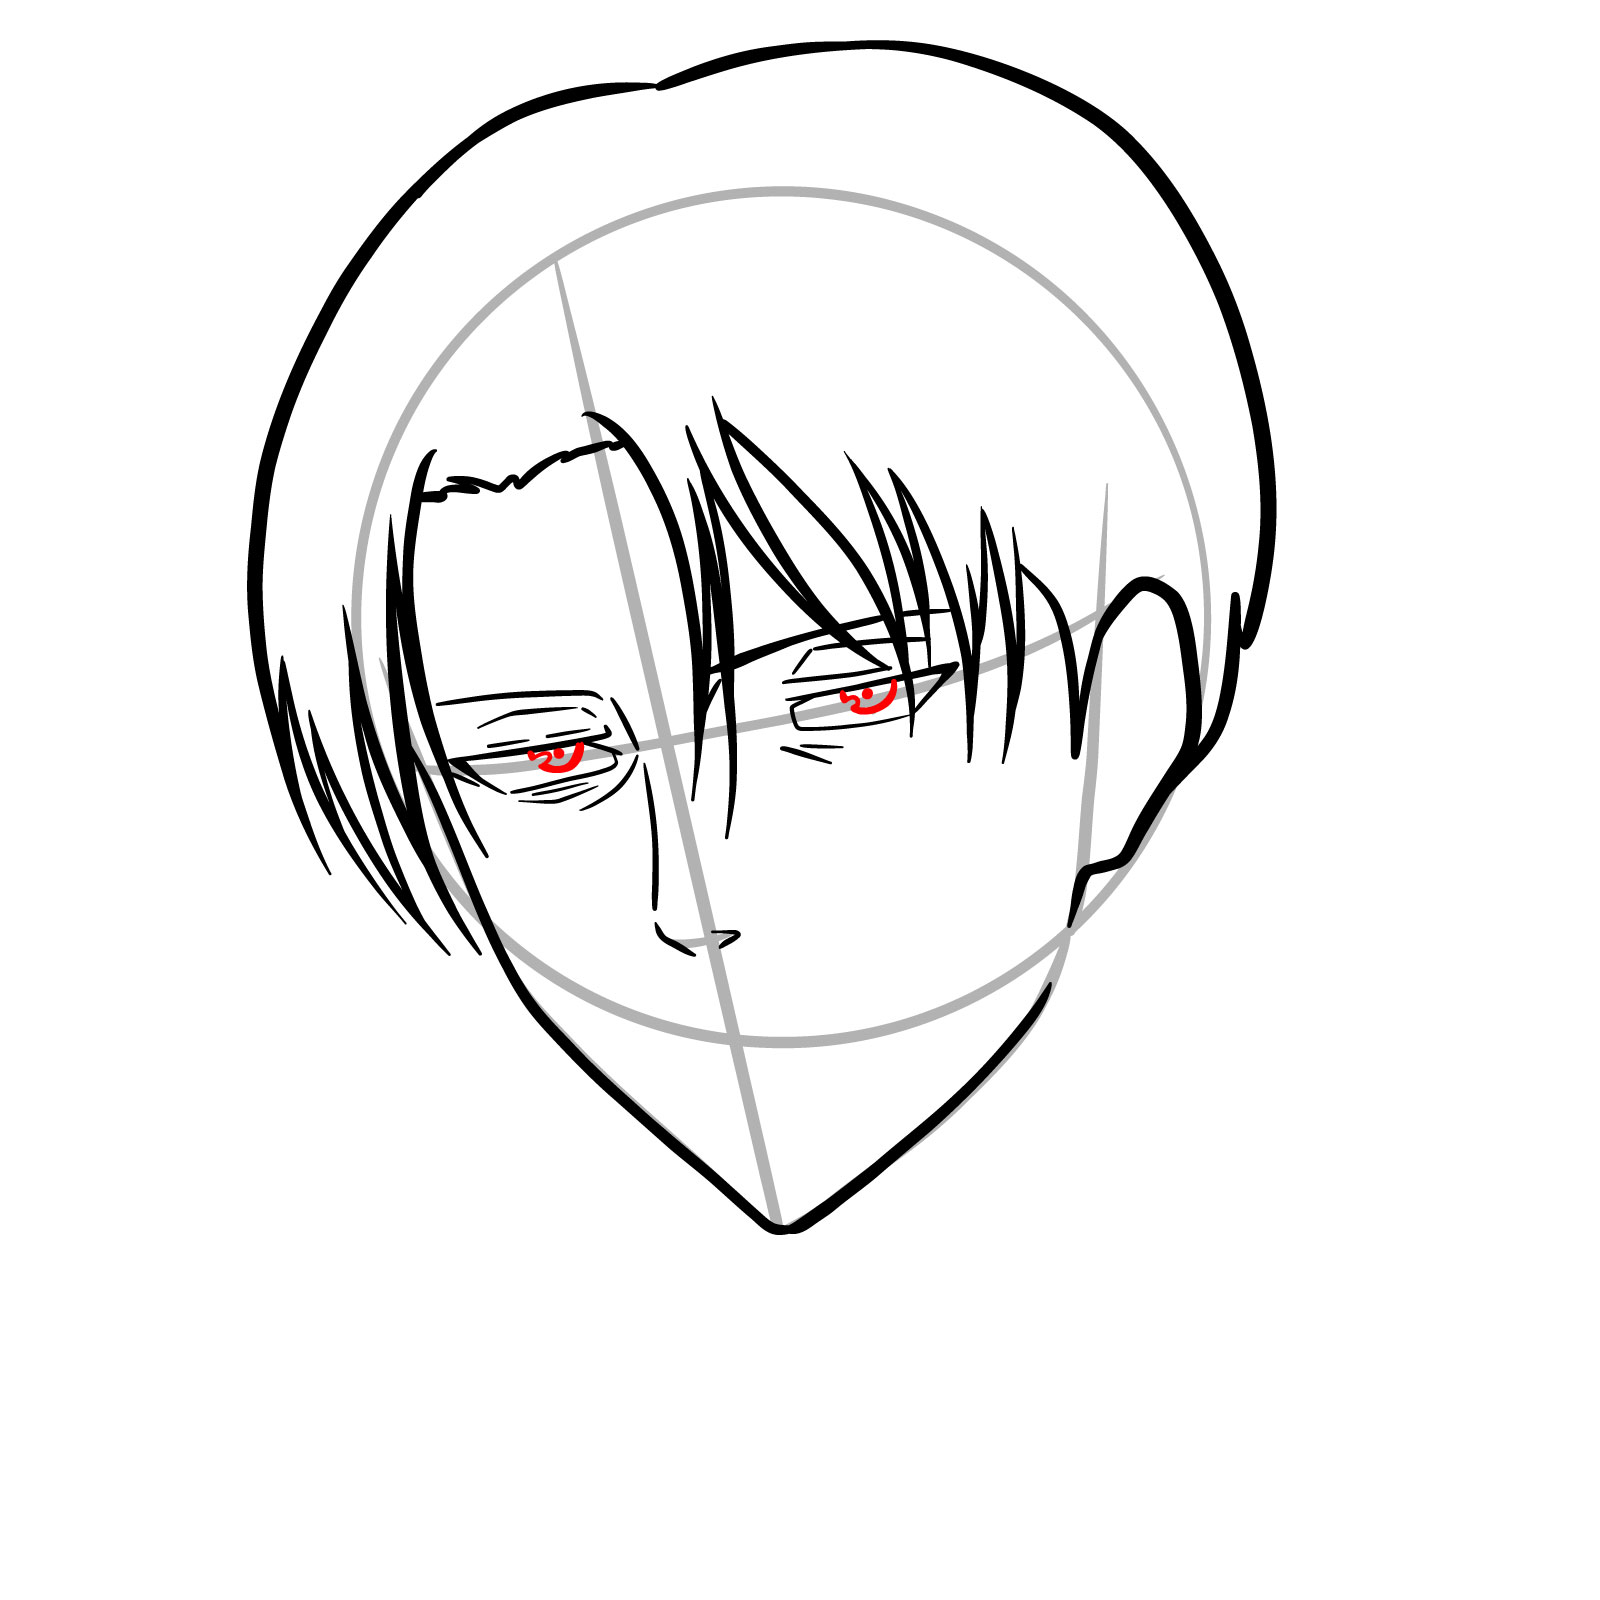 Adding eyeballs to Levi's face drawing in the 3/4 angle guide - step 10